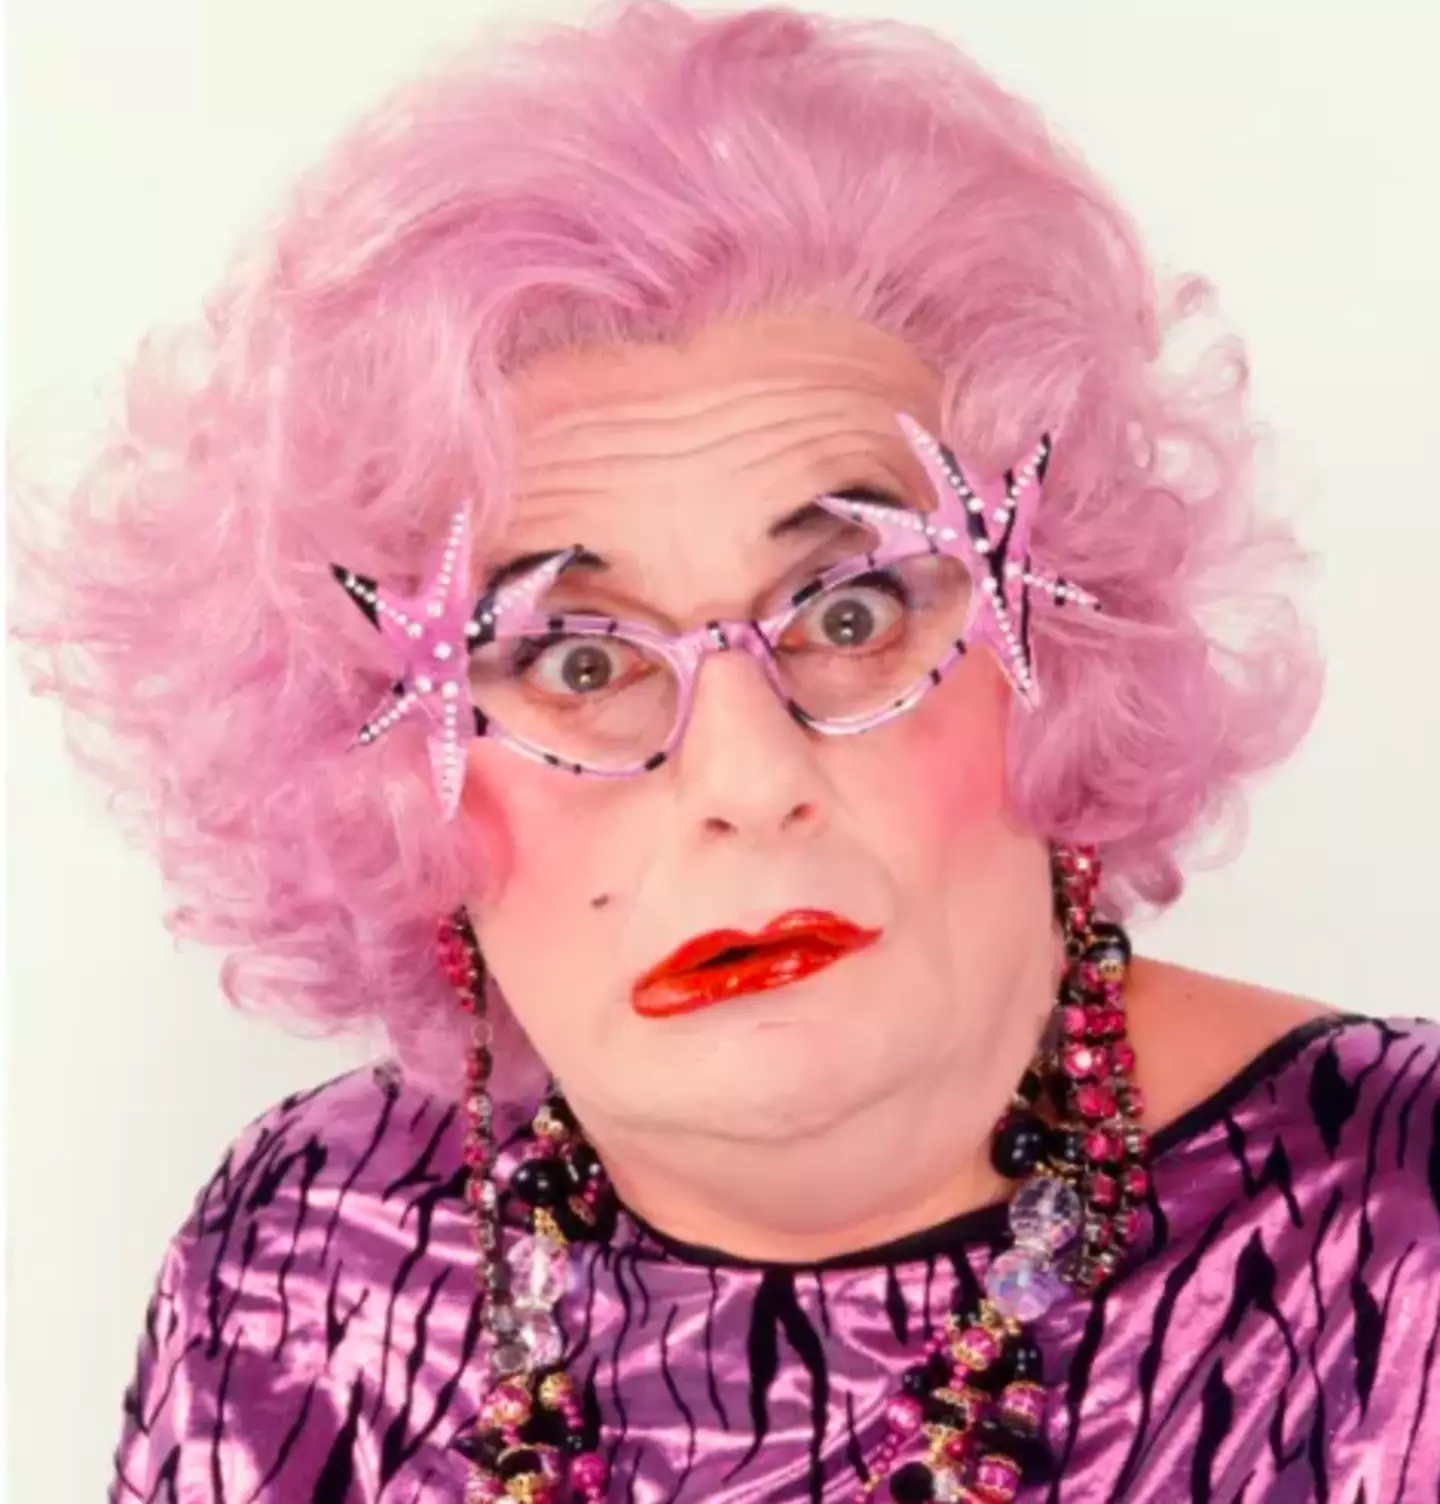 Dame Edna has been around since the 1950s.